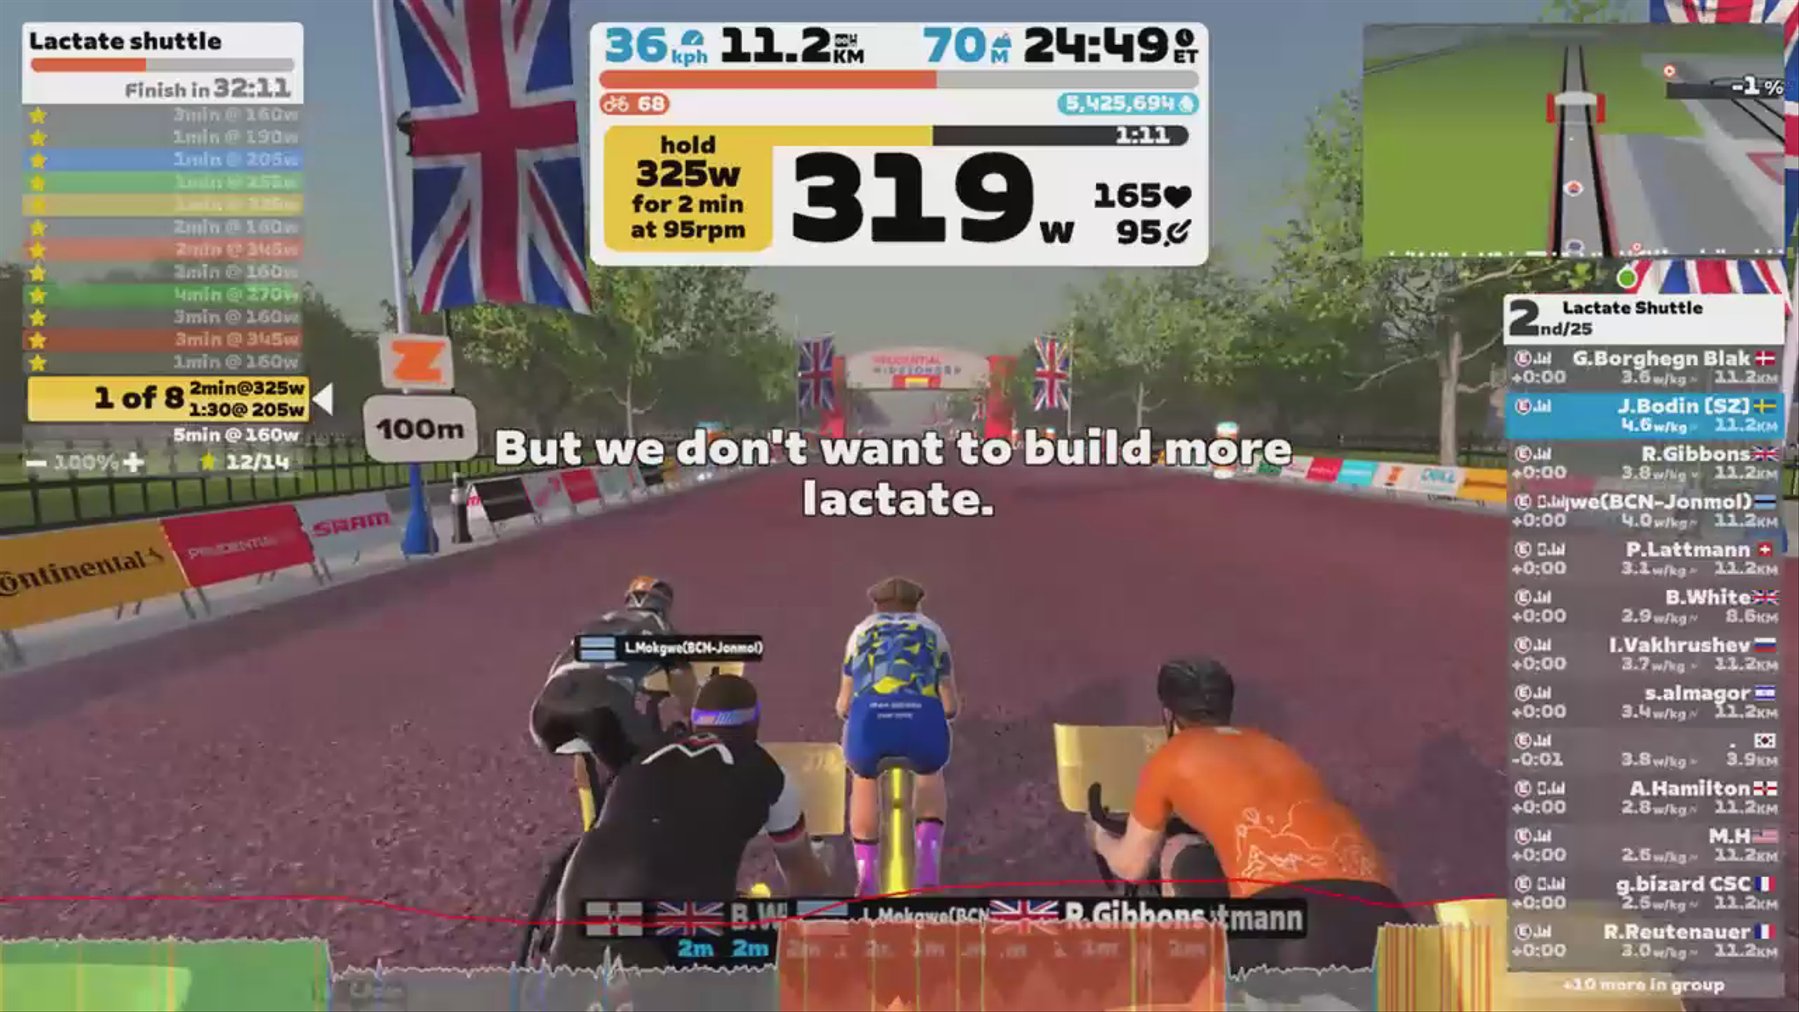 Zwift - Group Workout: Lactate Shuttle (E) on Classique in London